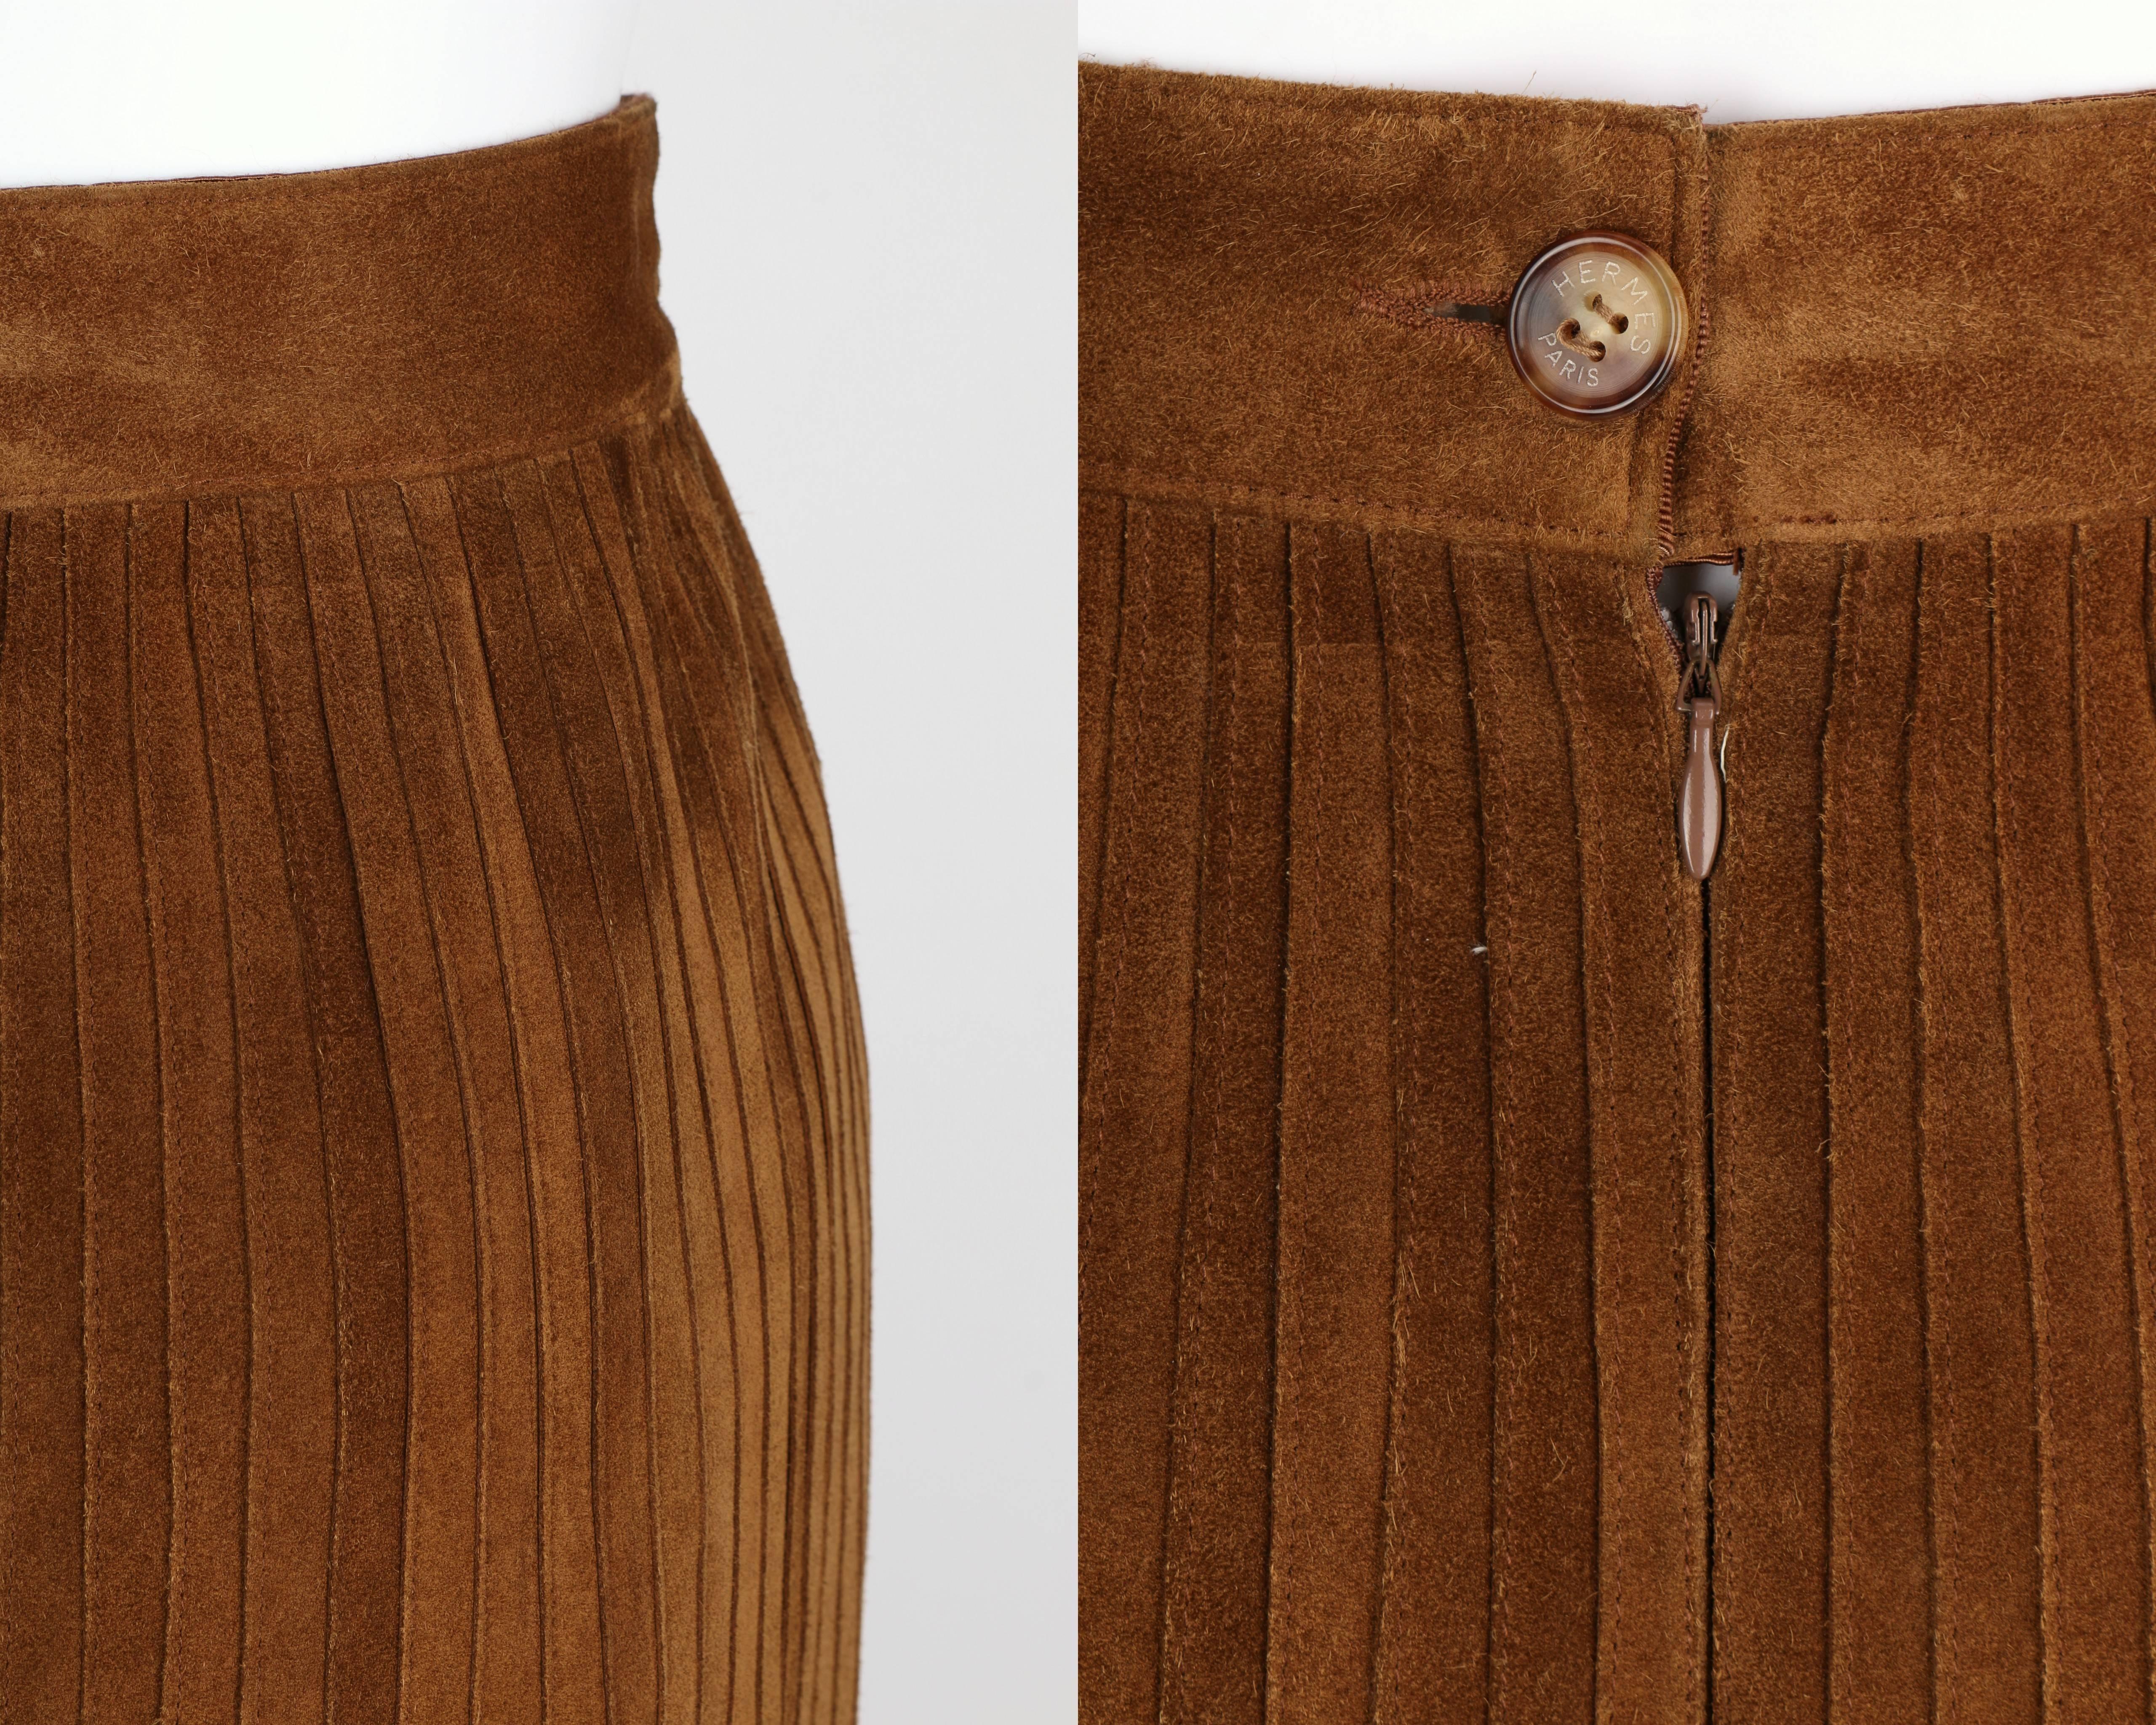 HERMES 1970s Brown Calf Skin Suede Leather Mini Long Maxi Fringe Skirt Size 38 1